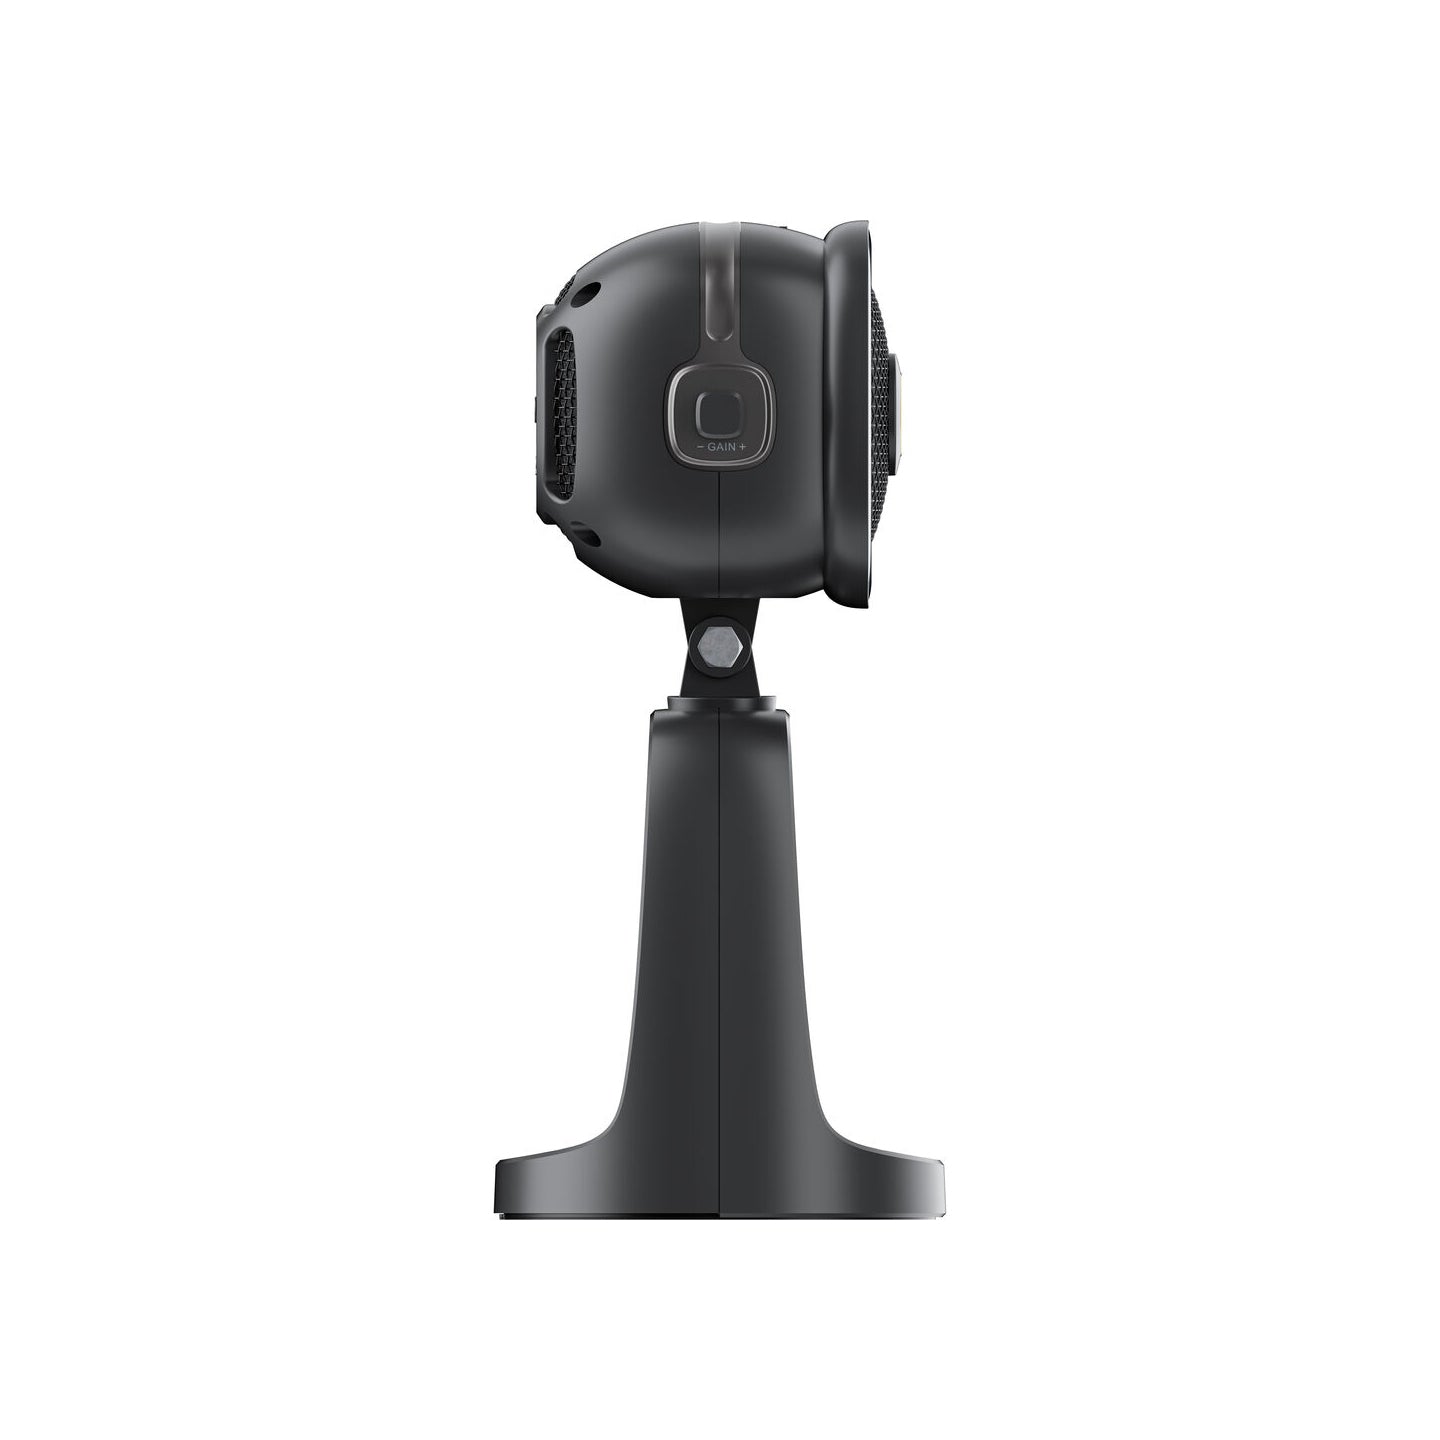 Boya BY-CM6B All-in-1 USB Microphone with Built In 4K HD Camera, LED Ring Light, Onboard Controls, 90 Degree Wide Angle Compatible with Android, PC, Laptop